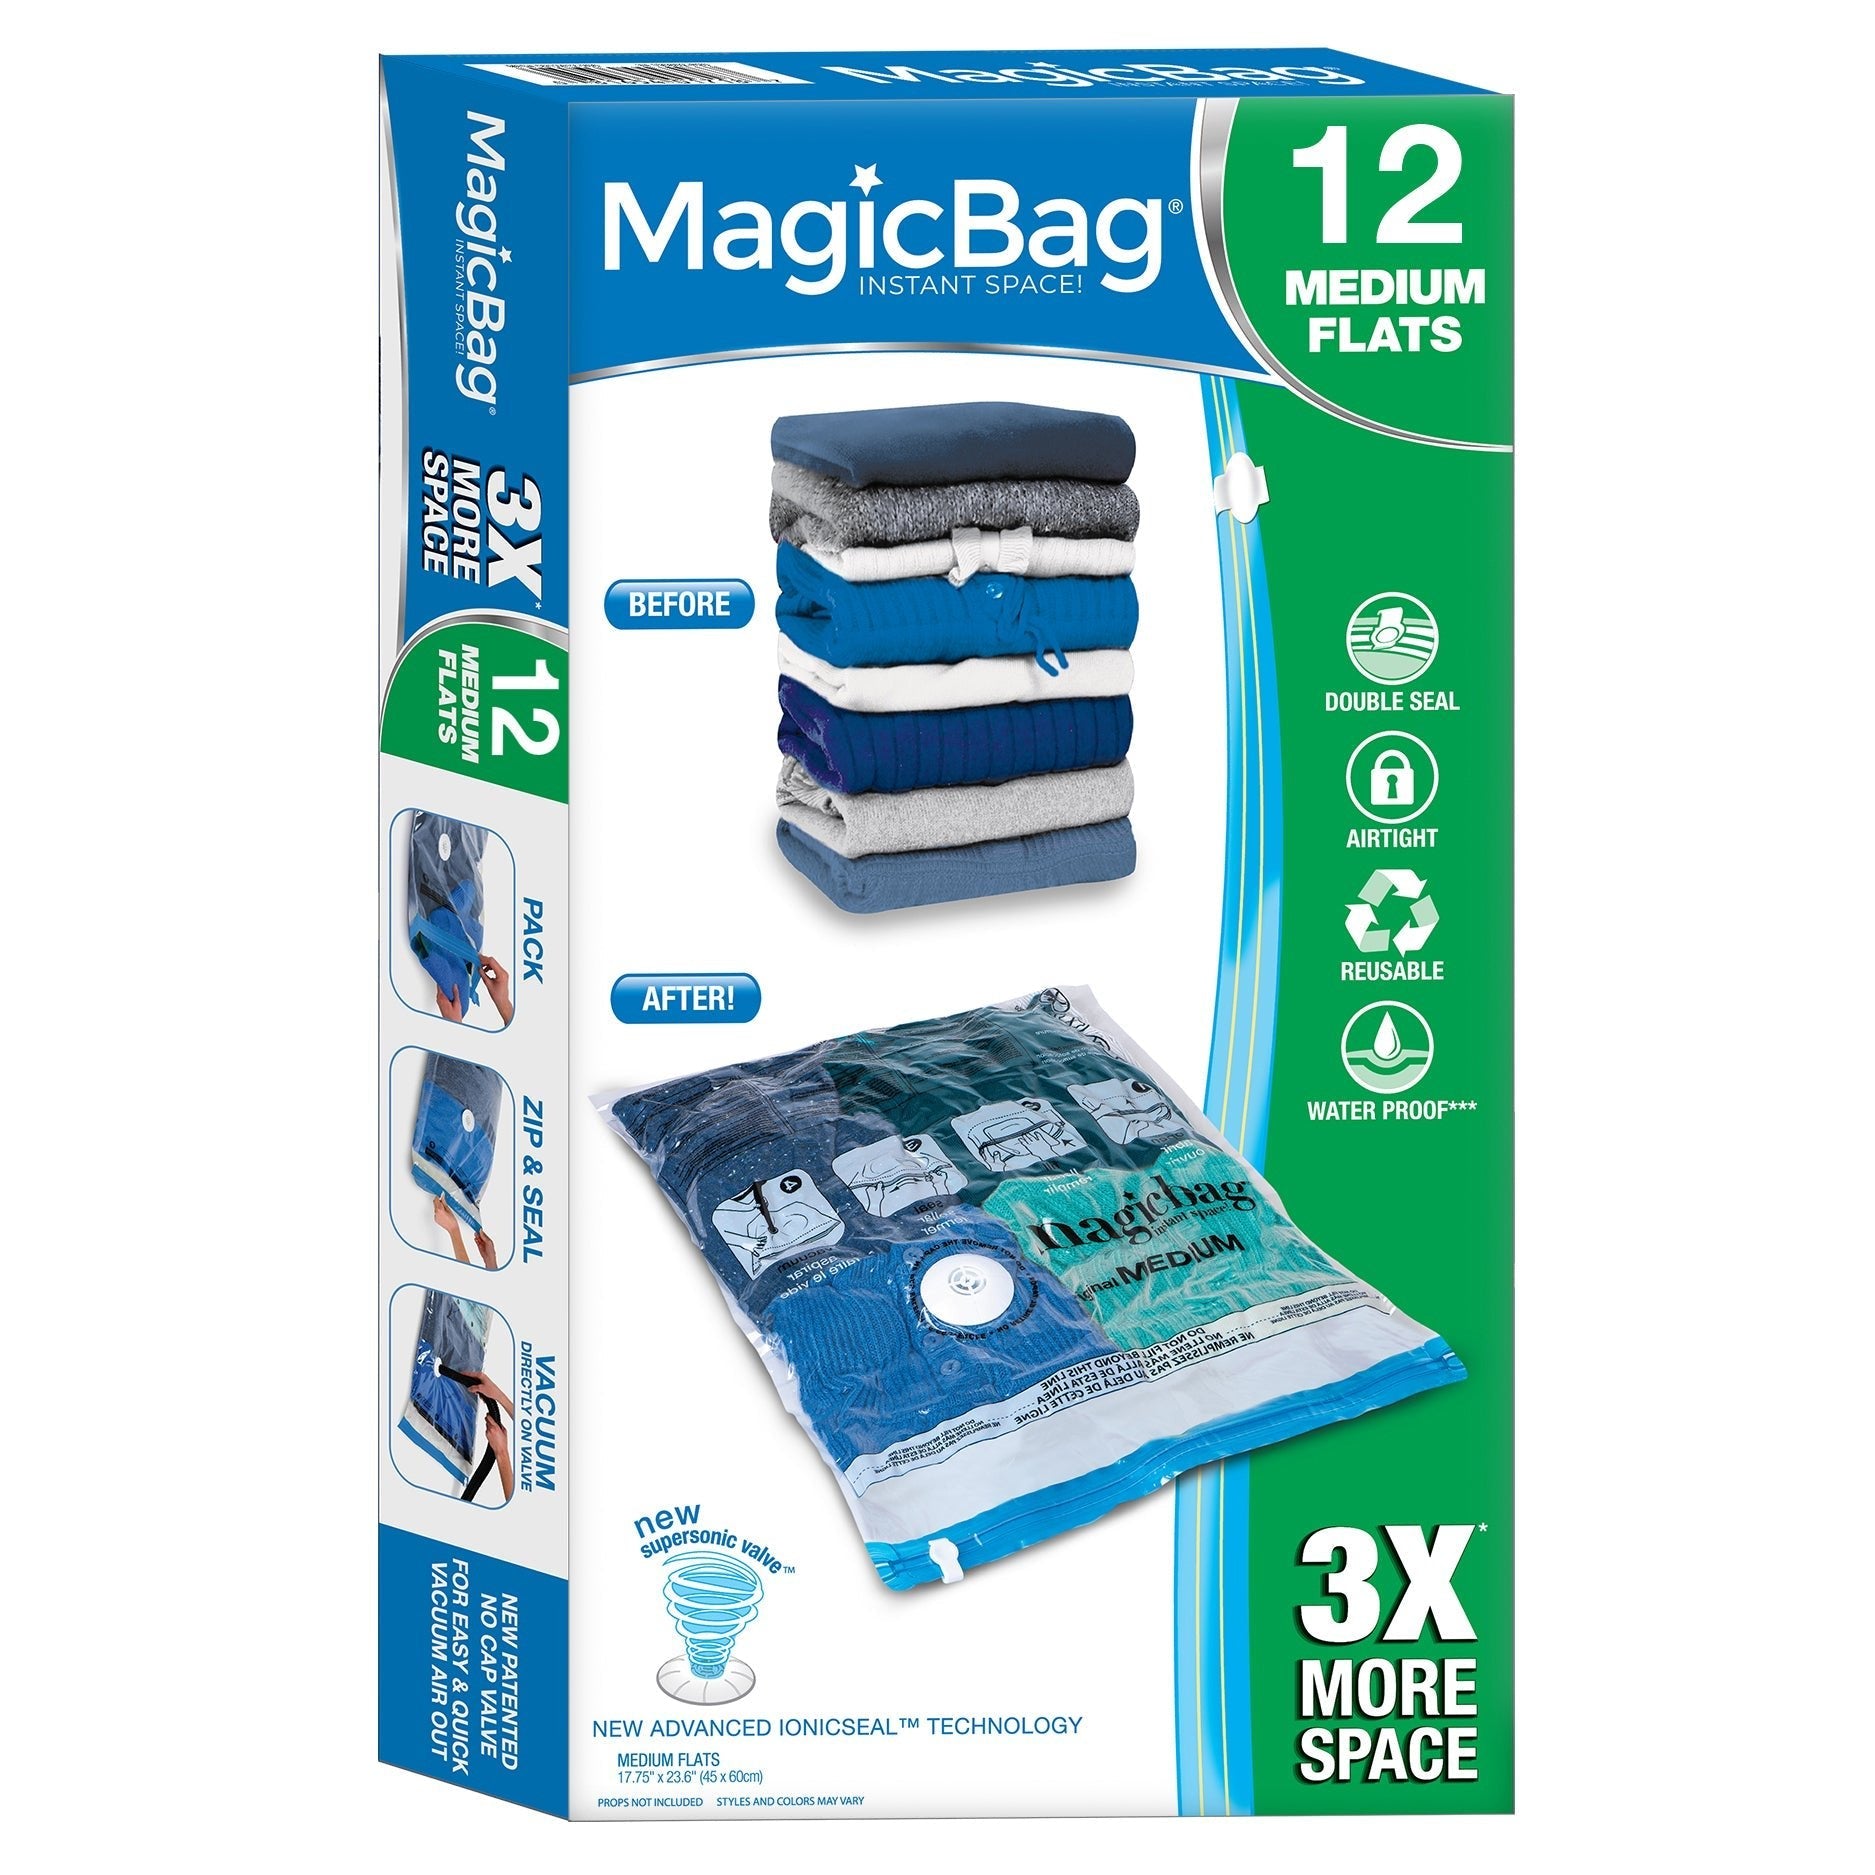 Magicbag Original Flat Double Zipper Instant Space Saver Storage 4 Pack Combo